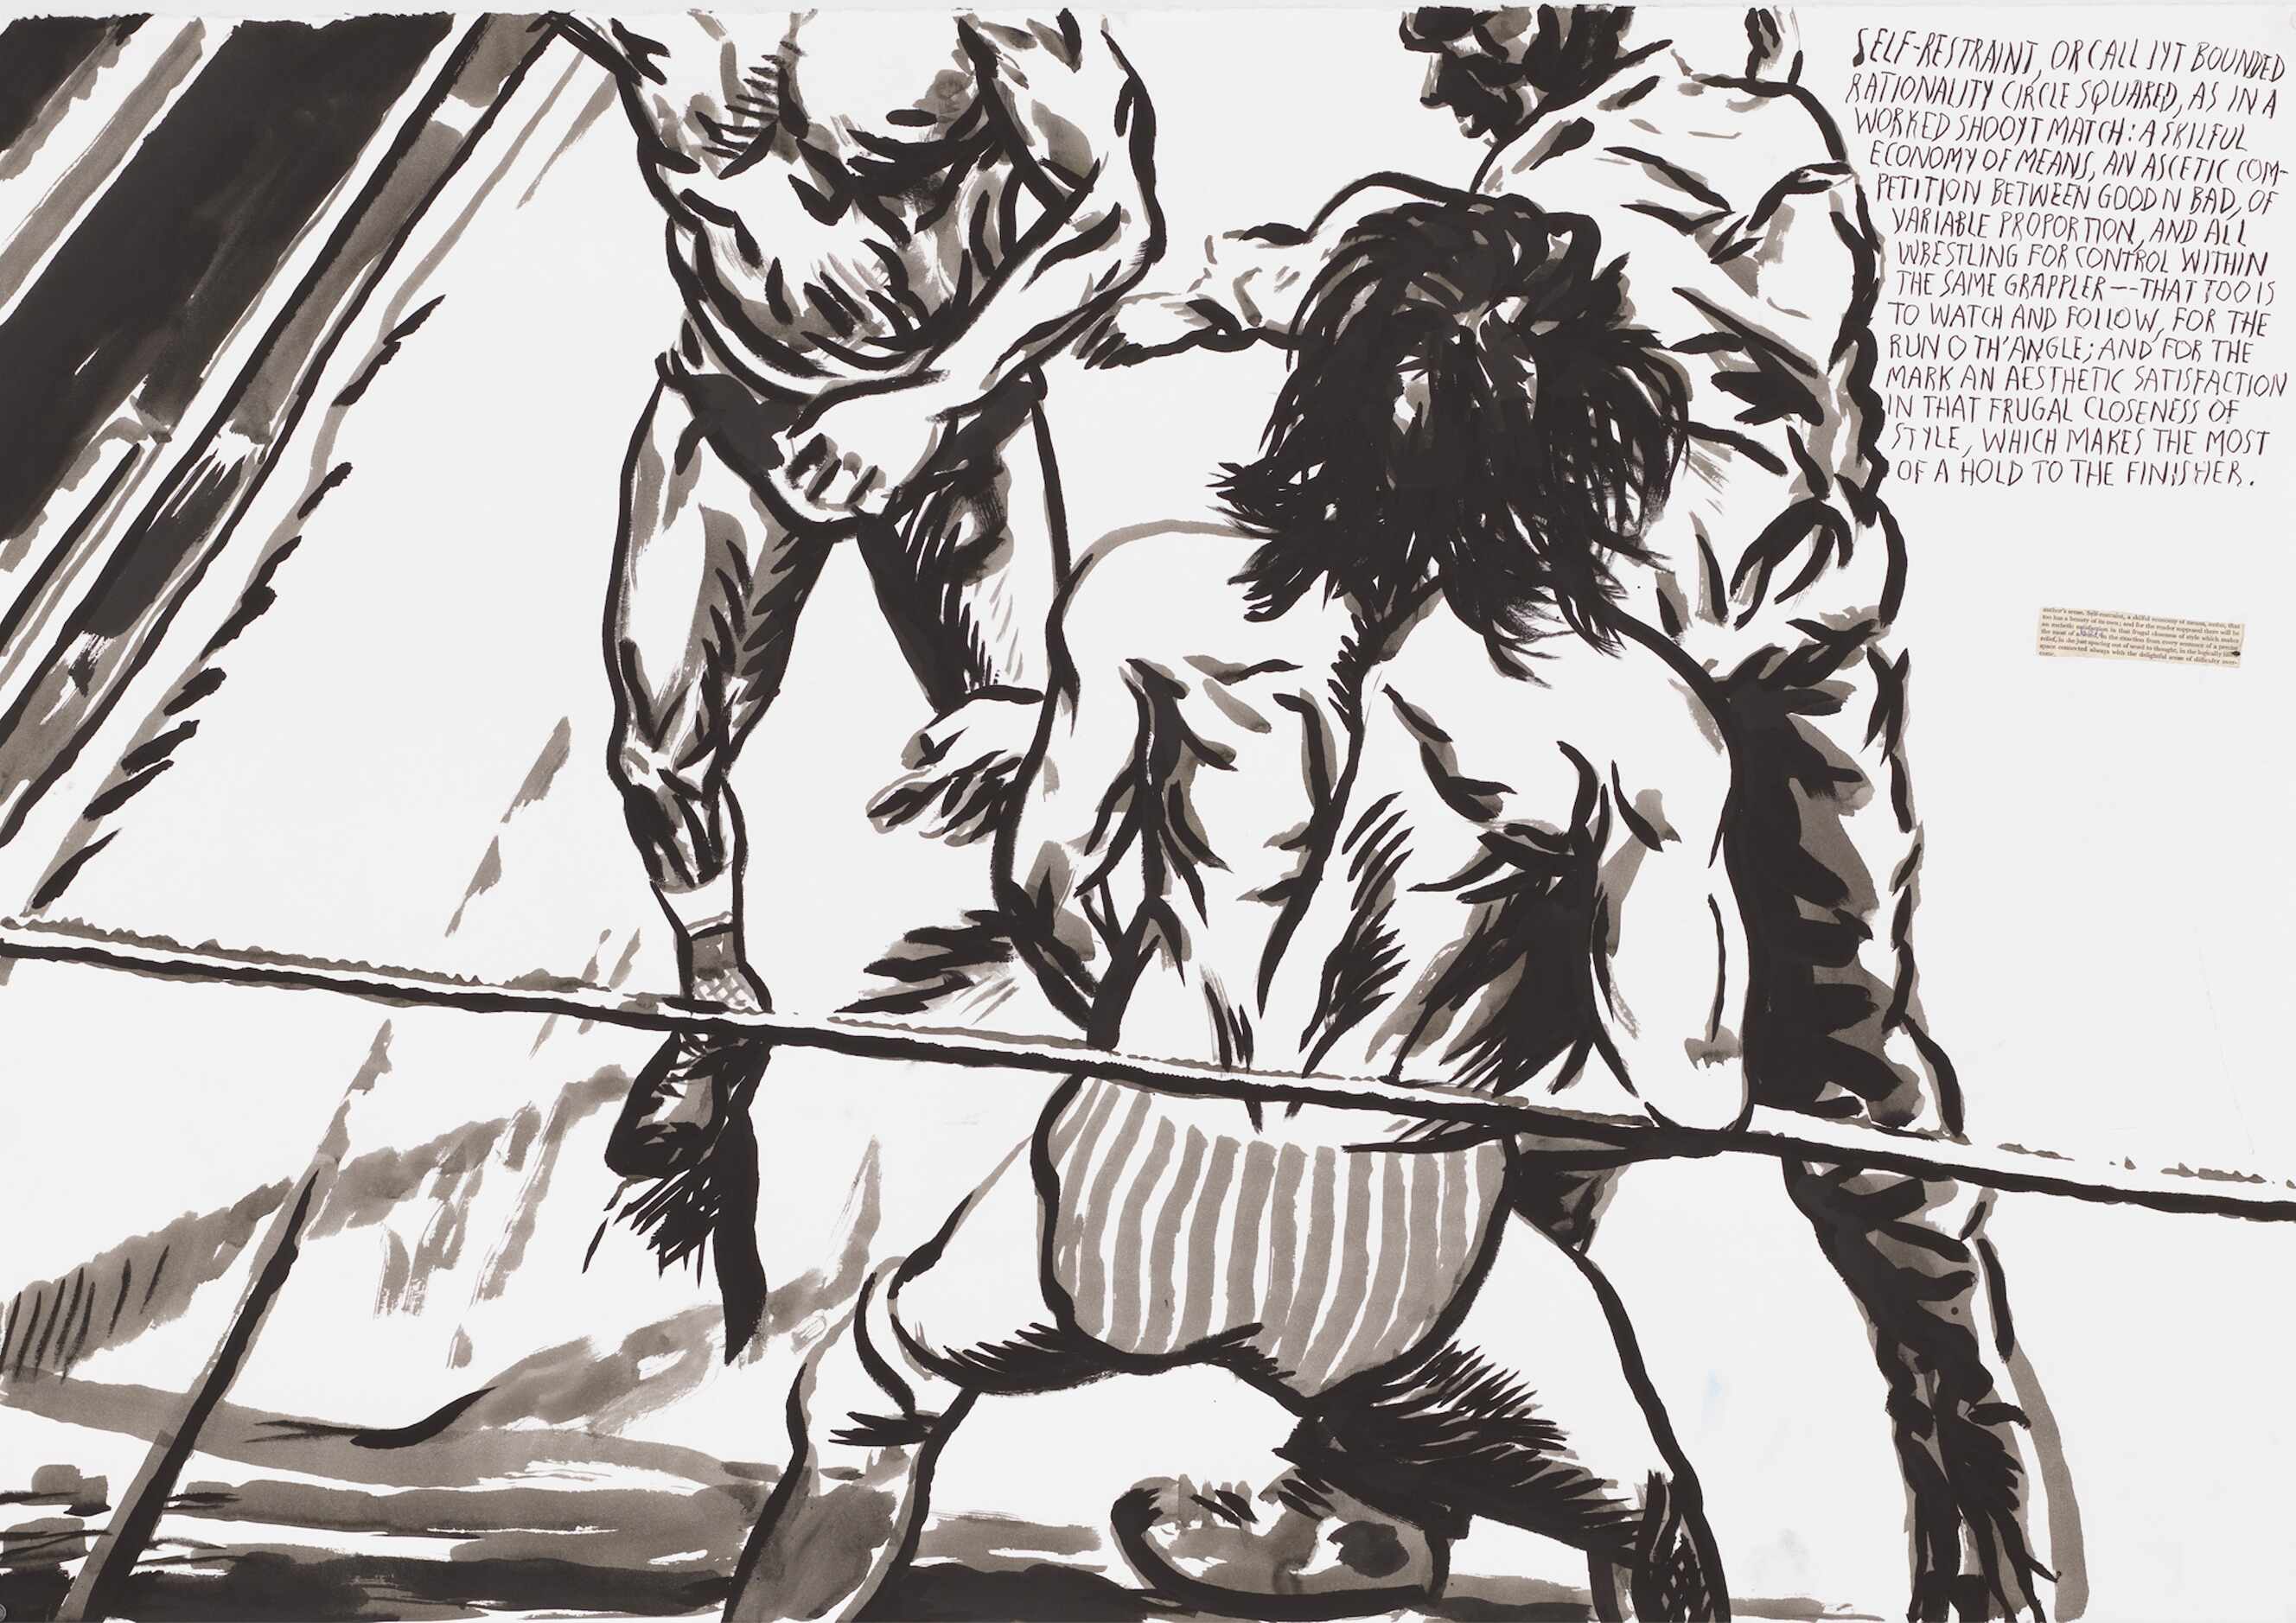 The latest volume of Orange Crush features the rare wrestling drawings of punk rock legend...